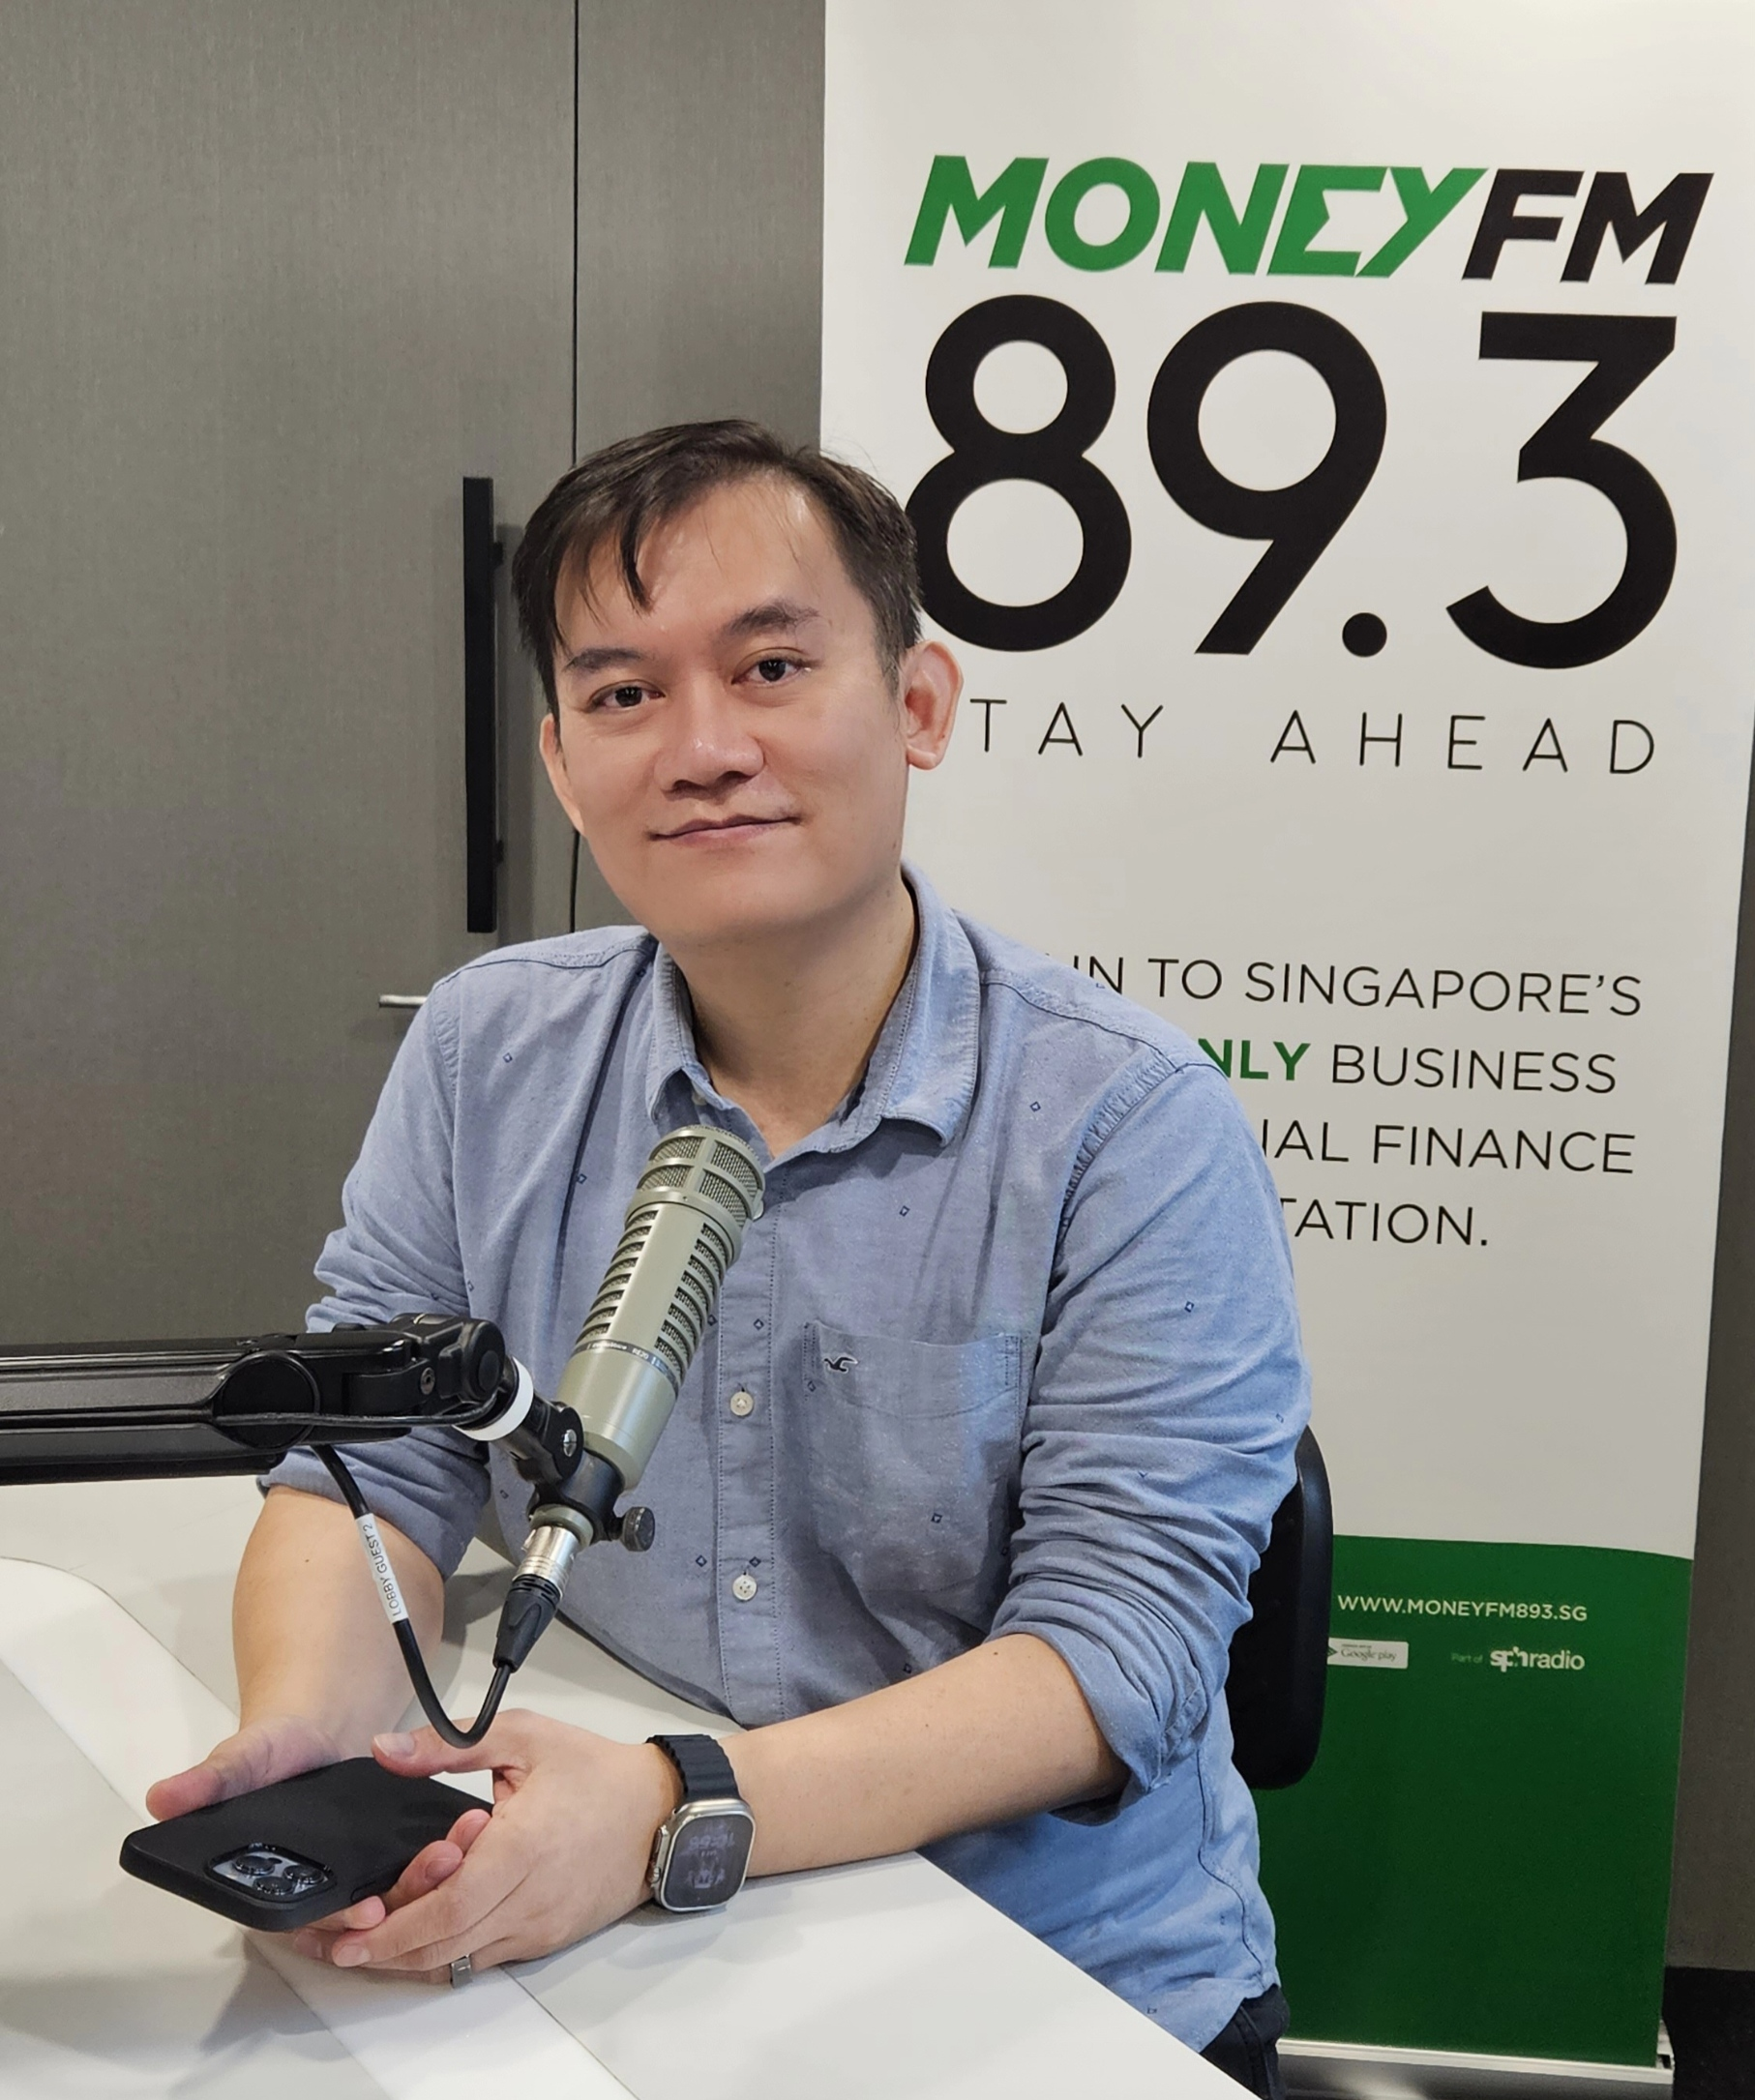 Saturday Mornings: Dr. Jared Ng thoughtfully addresses suicide prevention in Singapore